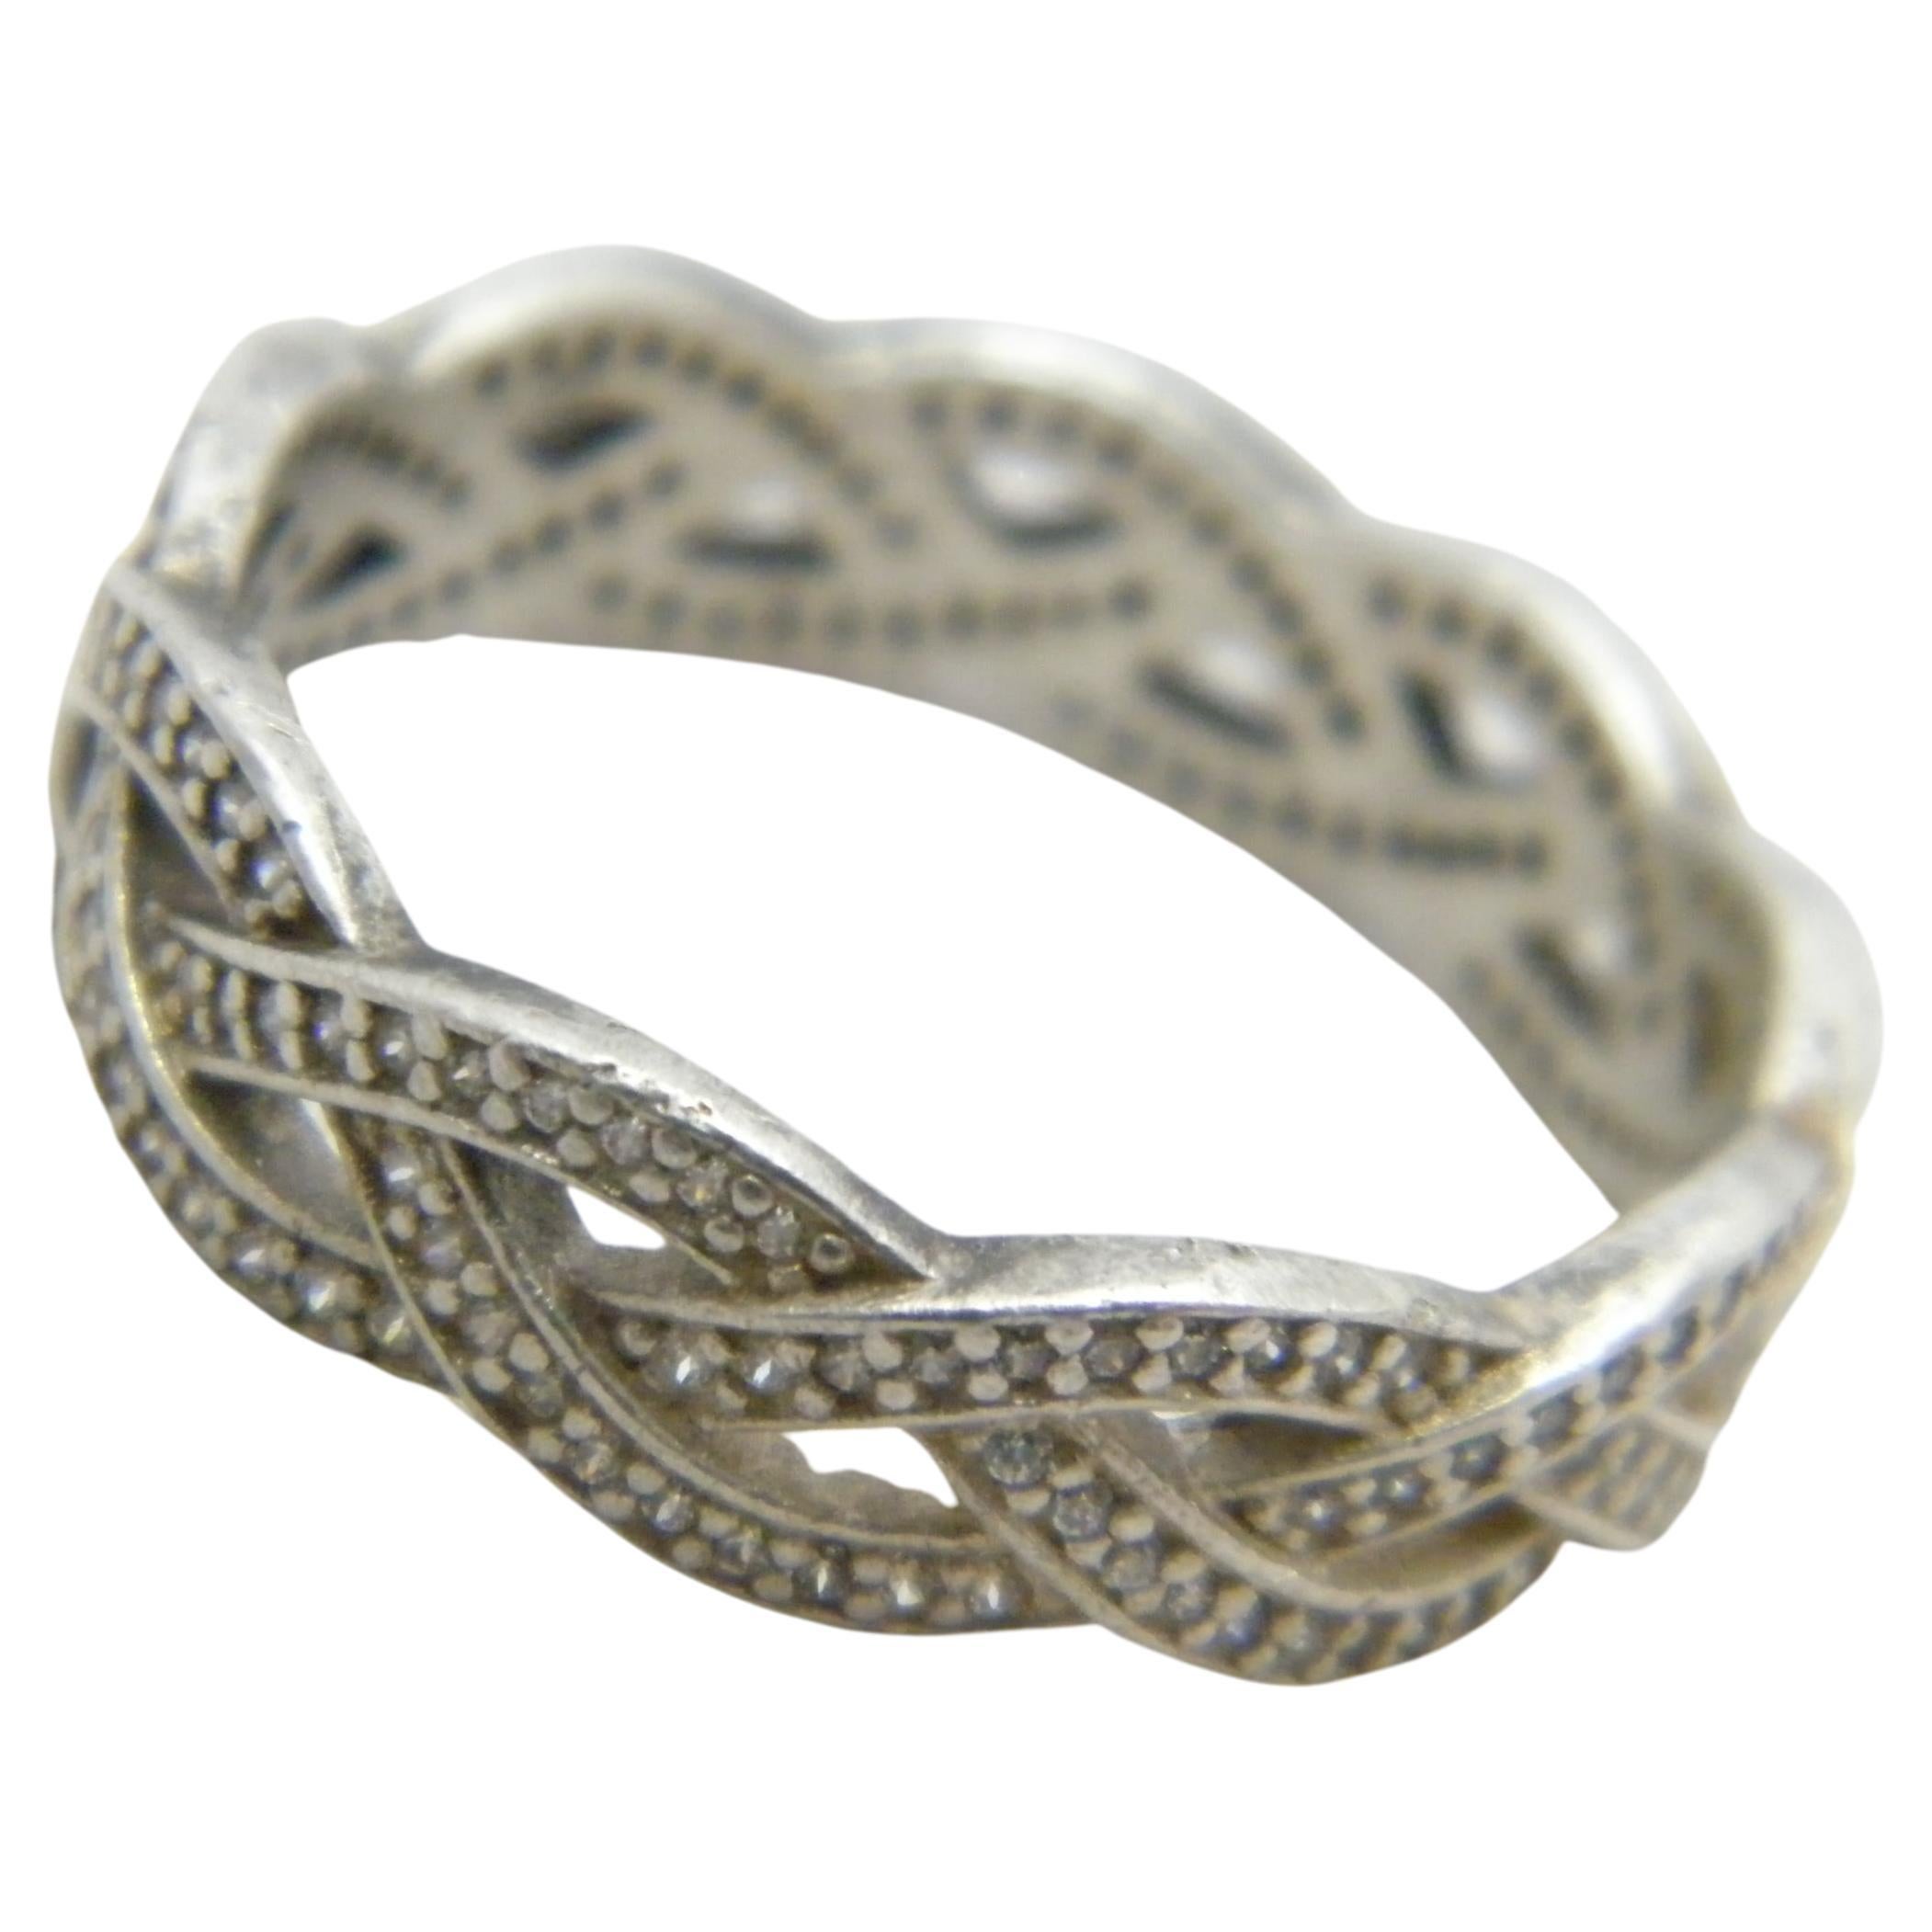 Vintage Palladium Diamond 6mm Celtic Weave Ring Size S 9.25 950 Purity Band For Sale